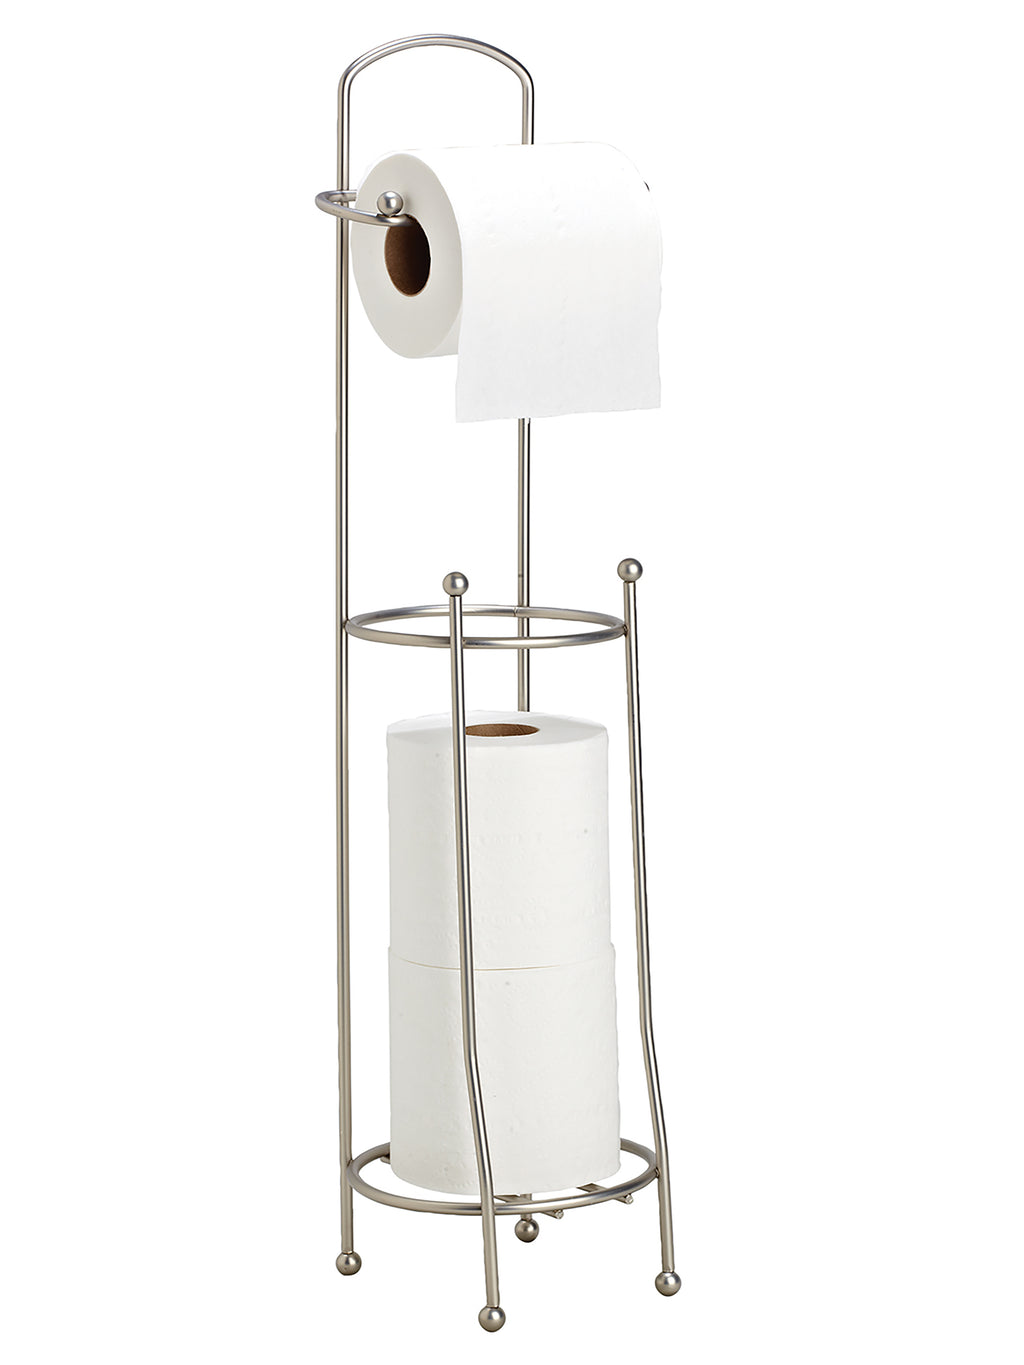 Bath Bliss Toilet Paper Reserve and Dispenser in Chrome